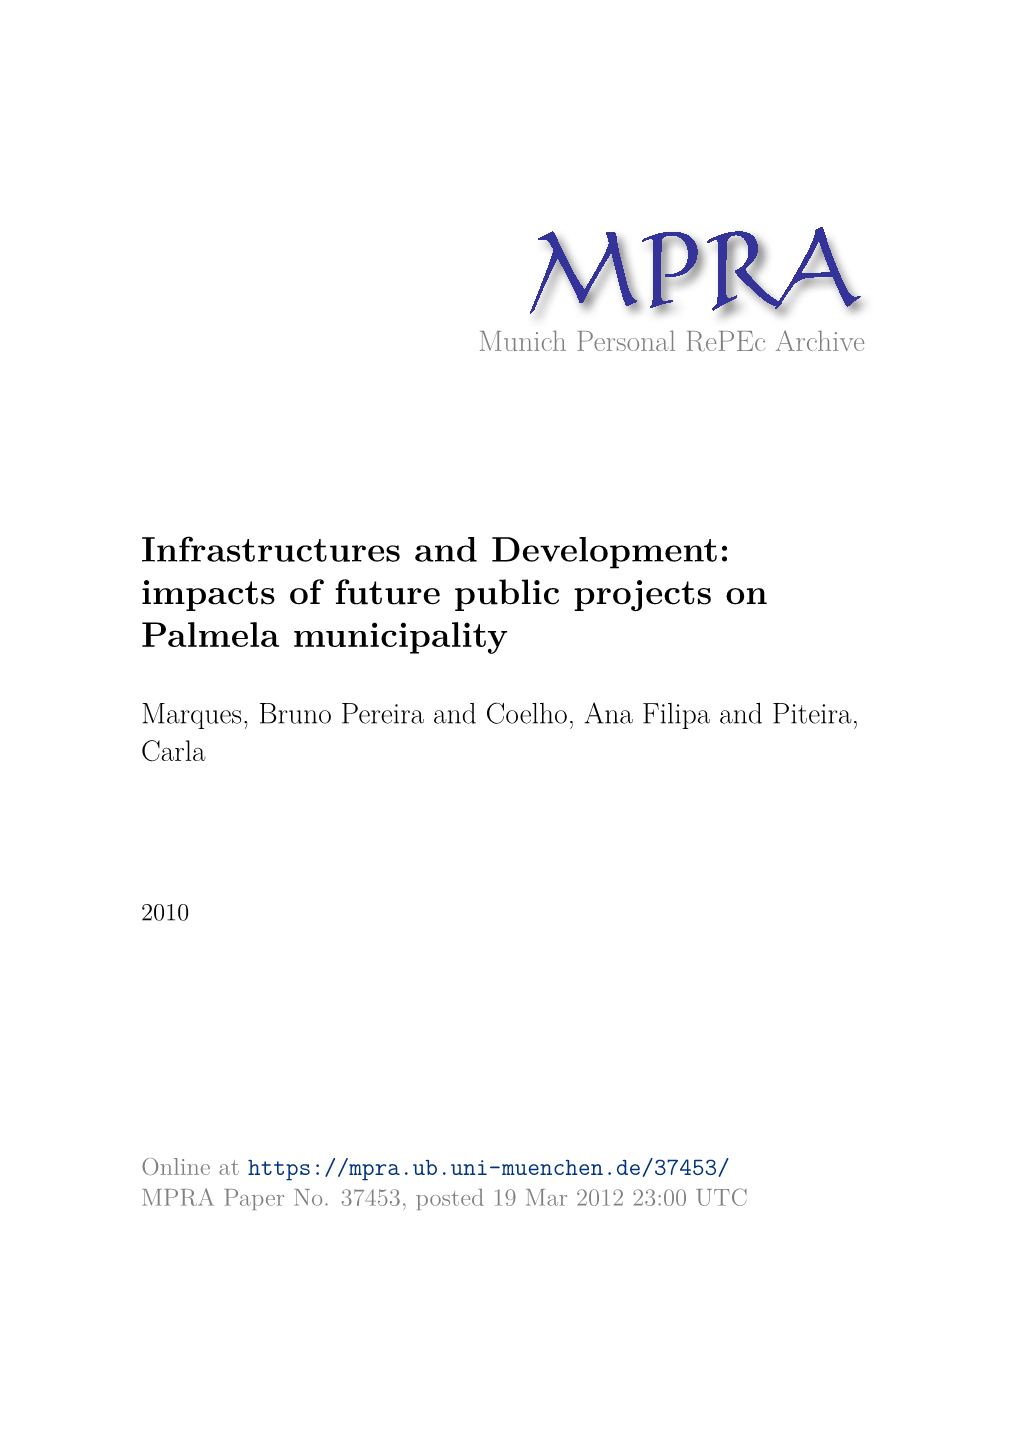 Infrastructures and Development: Impacts of Future Public Projects on Palmela Municipality